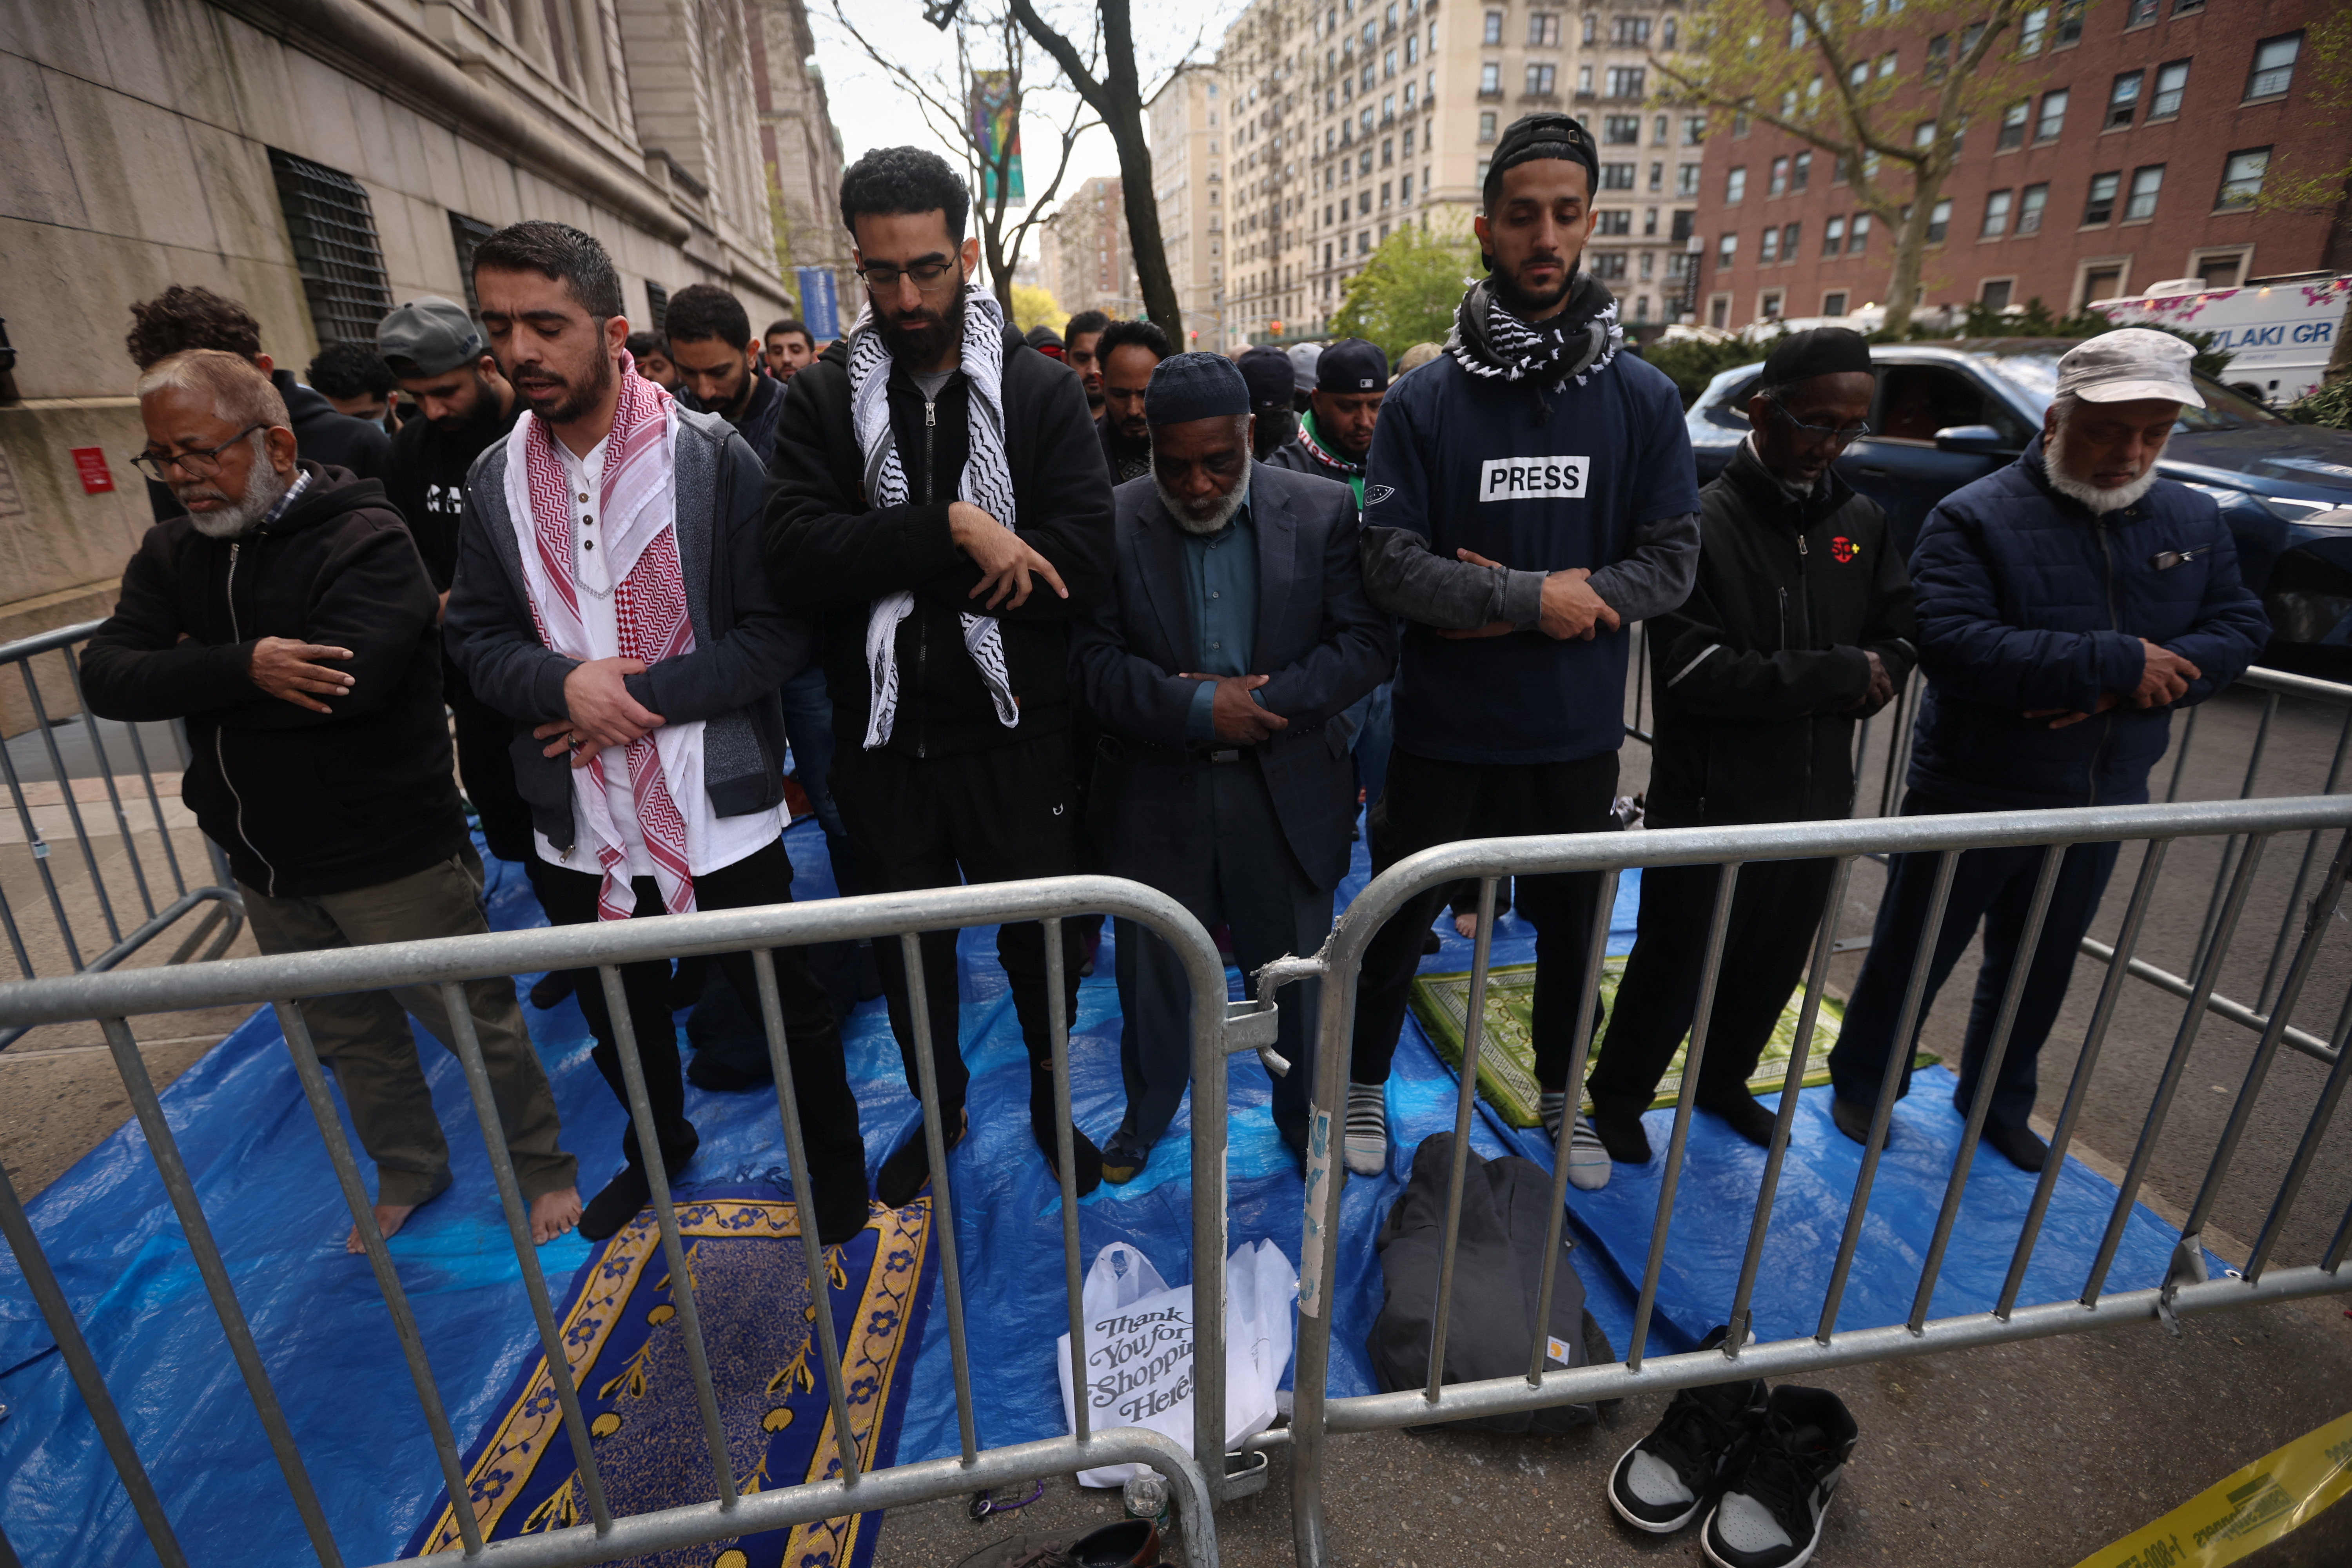 Muslims gather outside Columbia University campus to support student protest encampment in support of Palestinians, in New York City